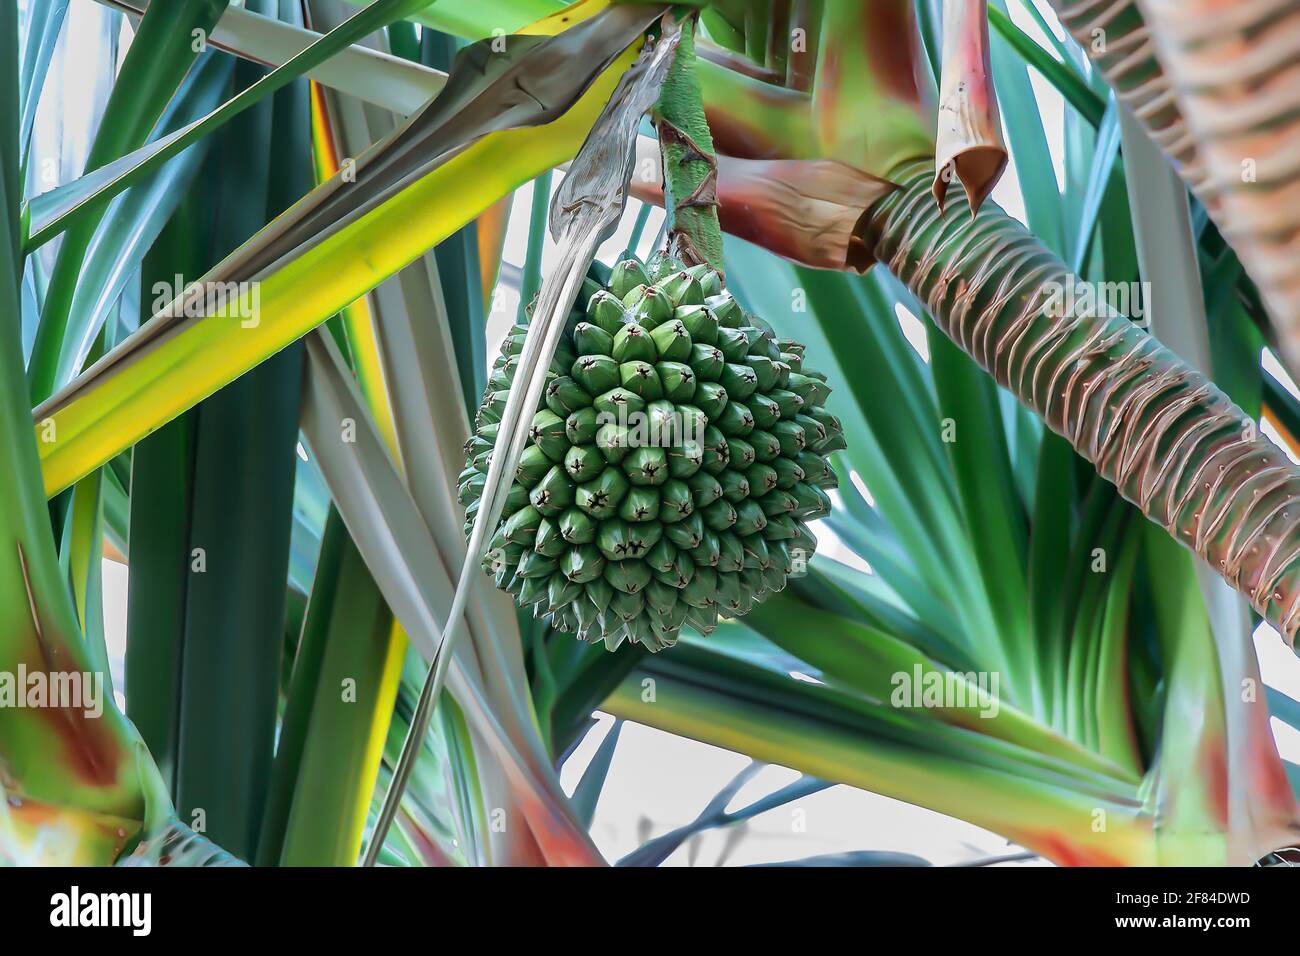 The Pandano, Pandanus utilis, is a tropical tree. Native to Madagascar and Mauritius, and appears in gardens in Puerto Rico, Florida, and California. Stock Photo